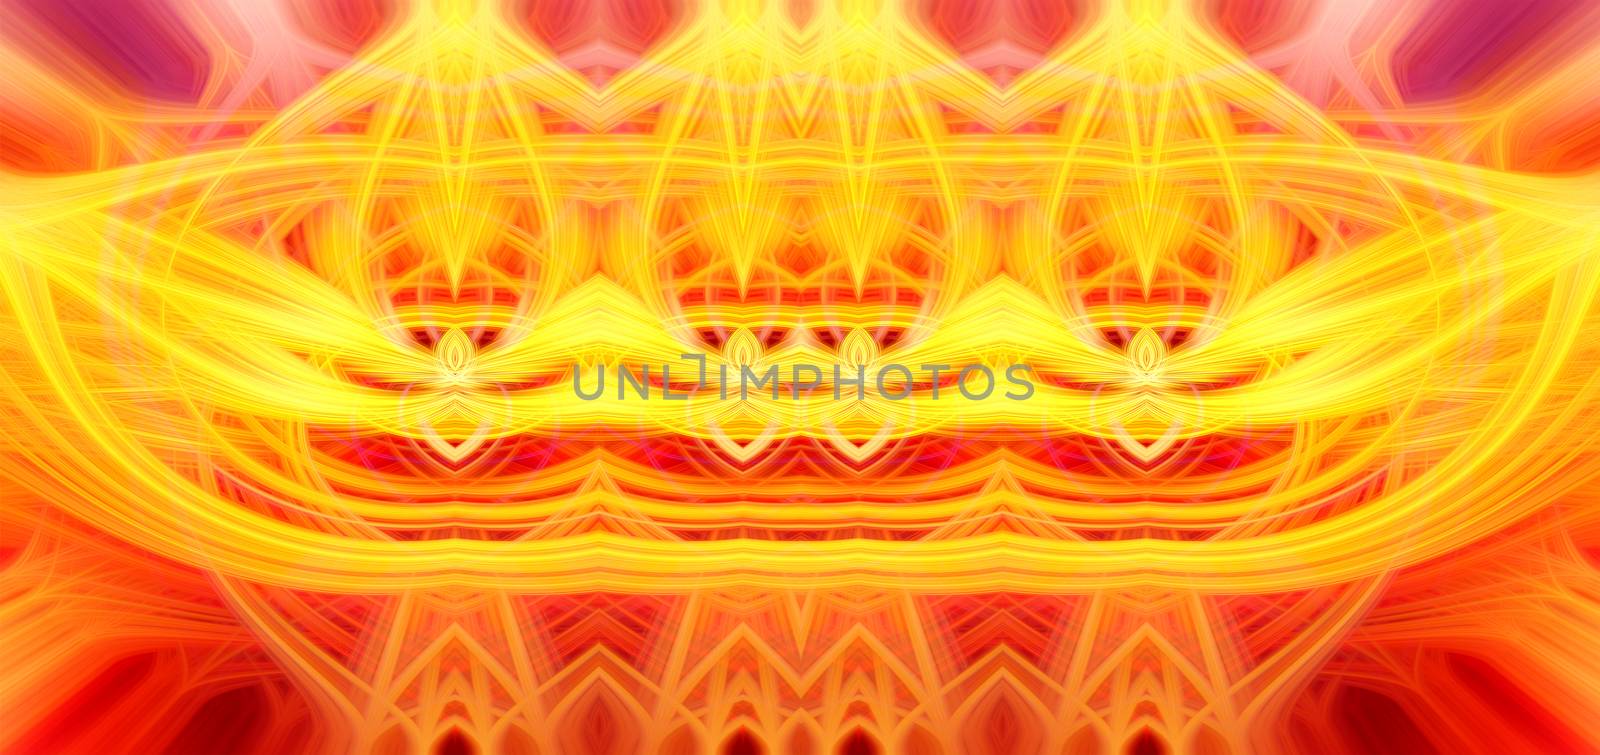 Beautiful abstract intertwined glowing 3d fibers forming a shape of sparkle, flame, flower, interlinked hearts. Yellow, orange, and red colors. Banner size. Illustration by DamantisZ